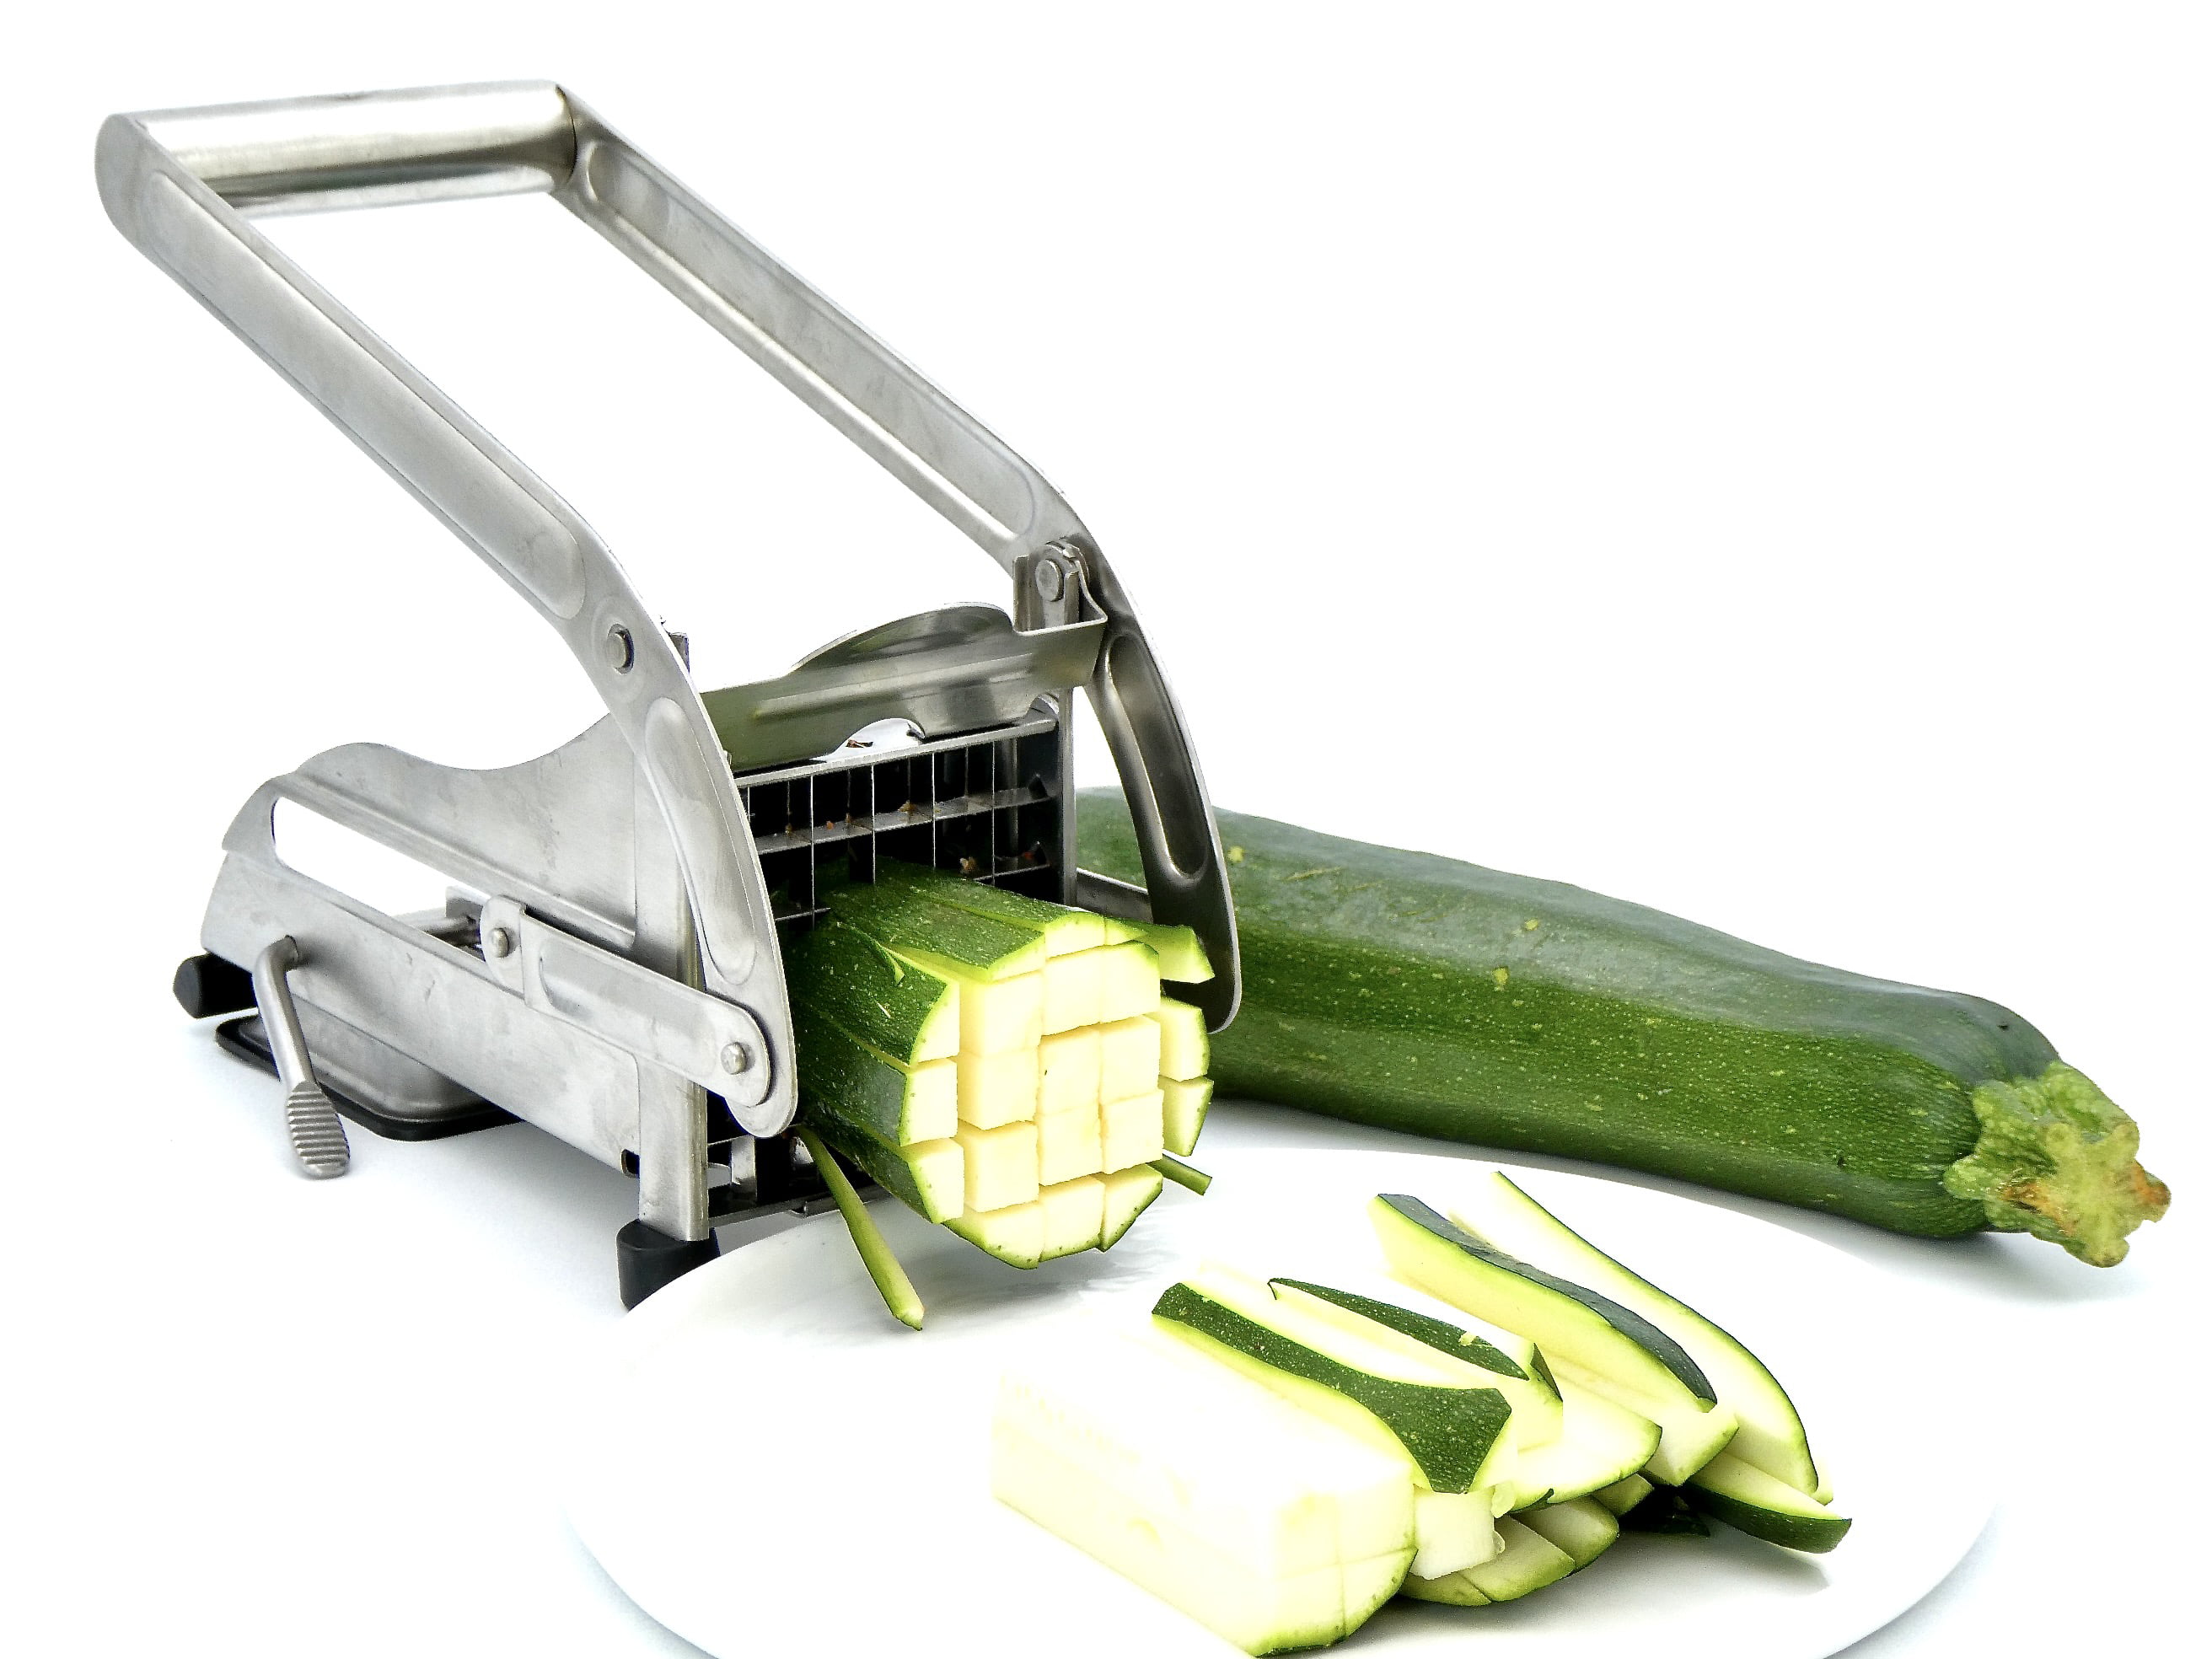 Moocorvic Cup Slicer for Food and Vegetables French Fry Cutter